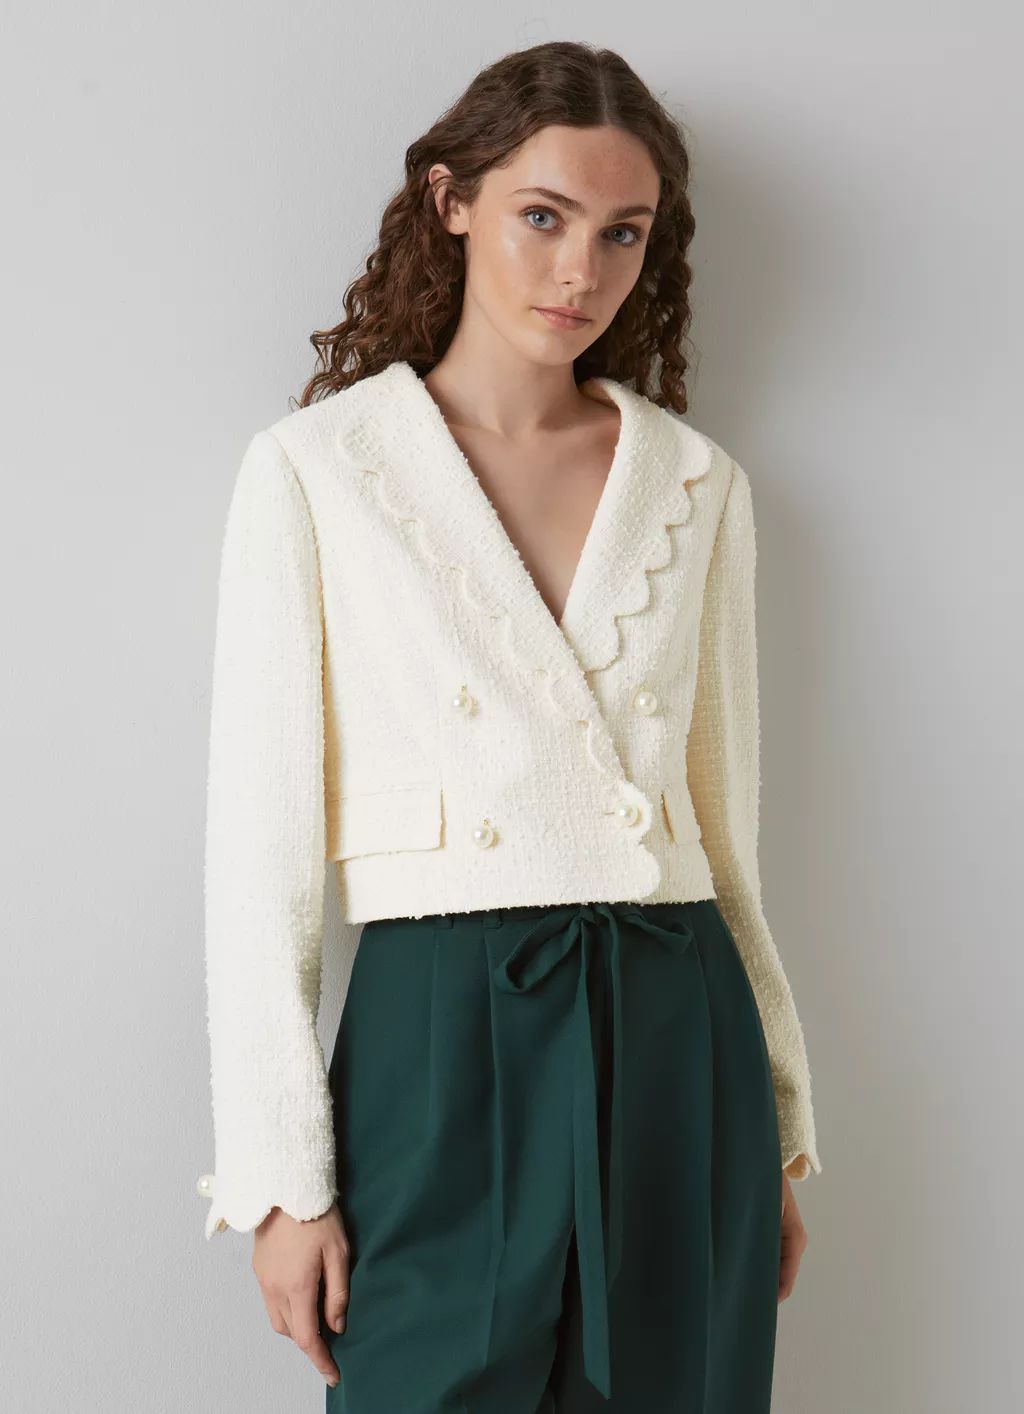 Venice Cream Tweed Scallop Edge Cropped Jacket | Coats & Jackets | Clothing | Collections | L.K.B... | L.K. Bennett (UK)